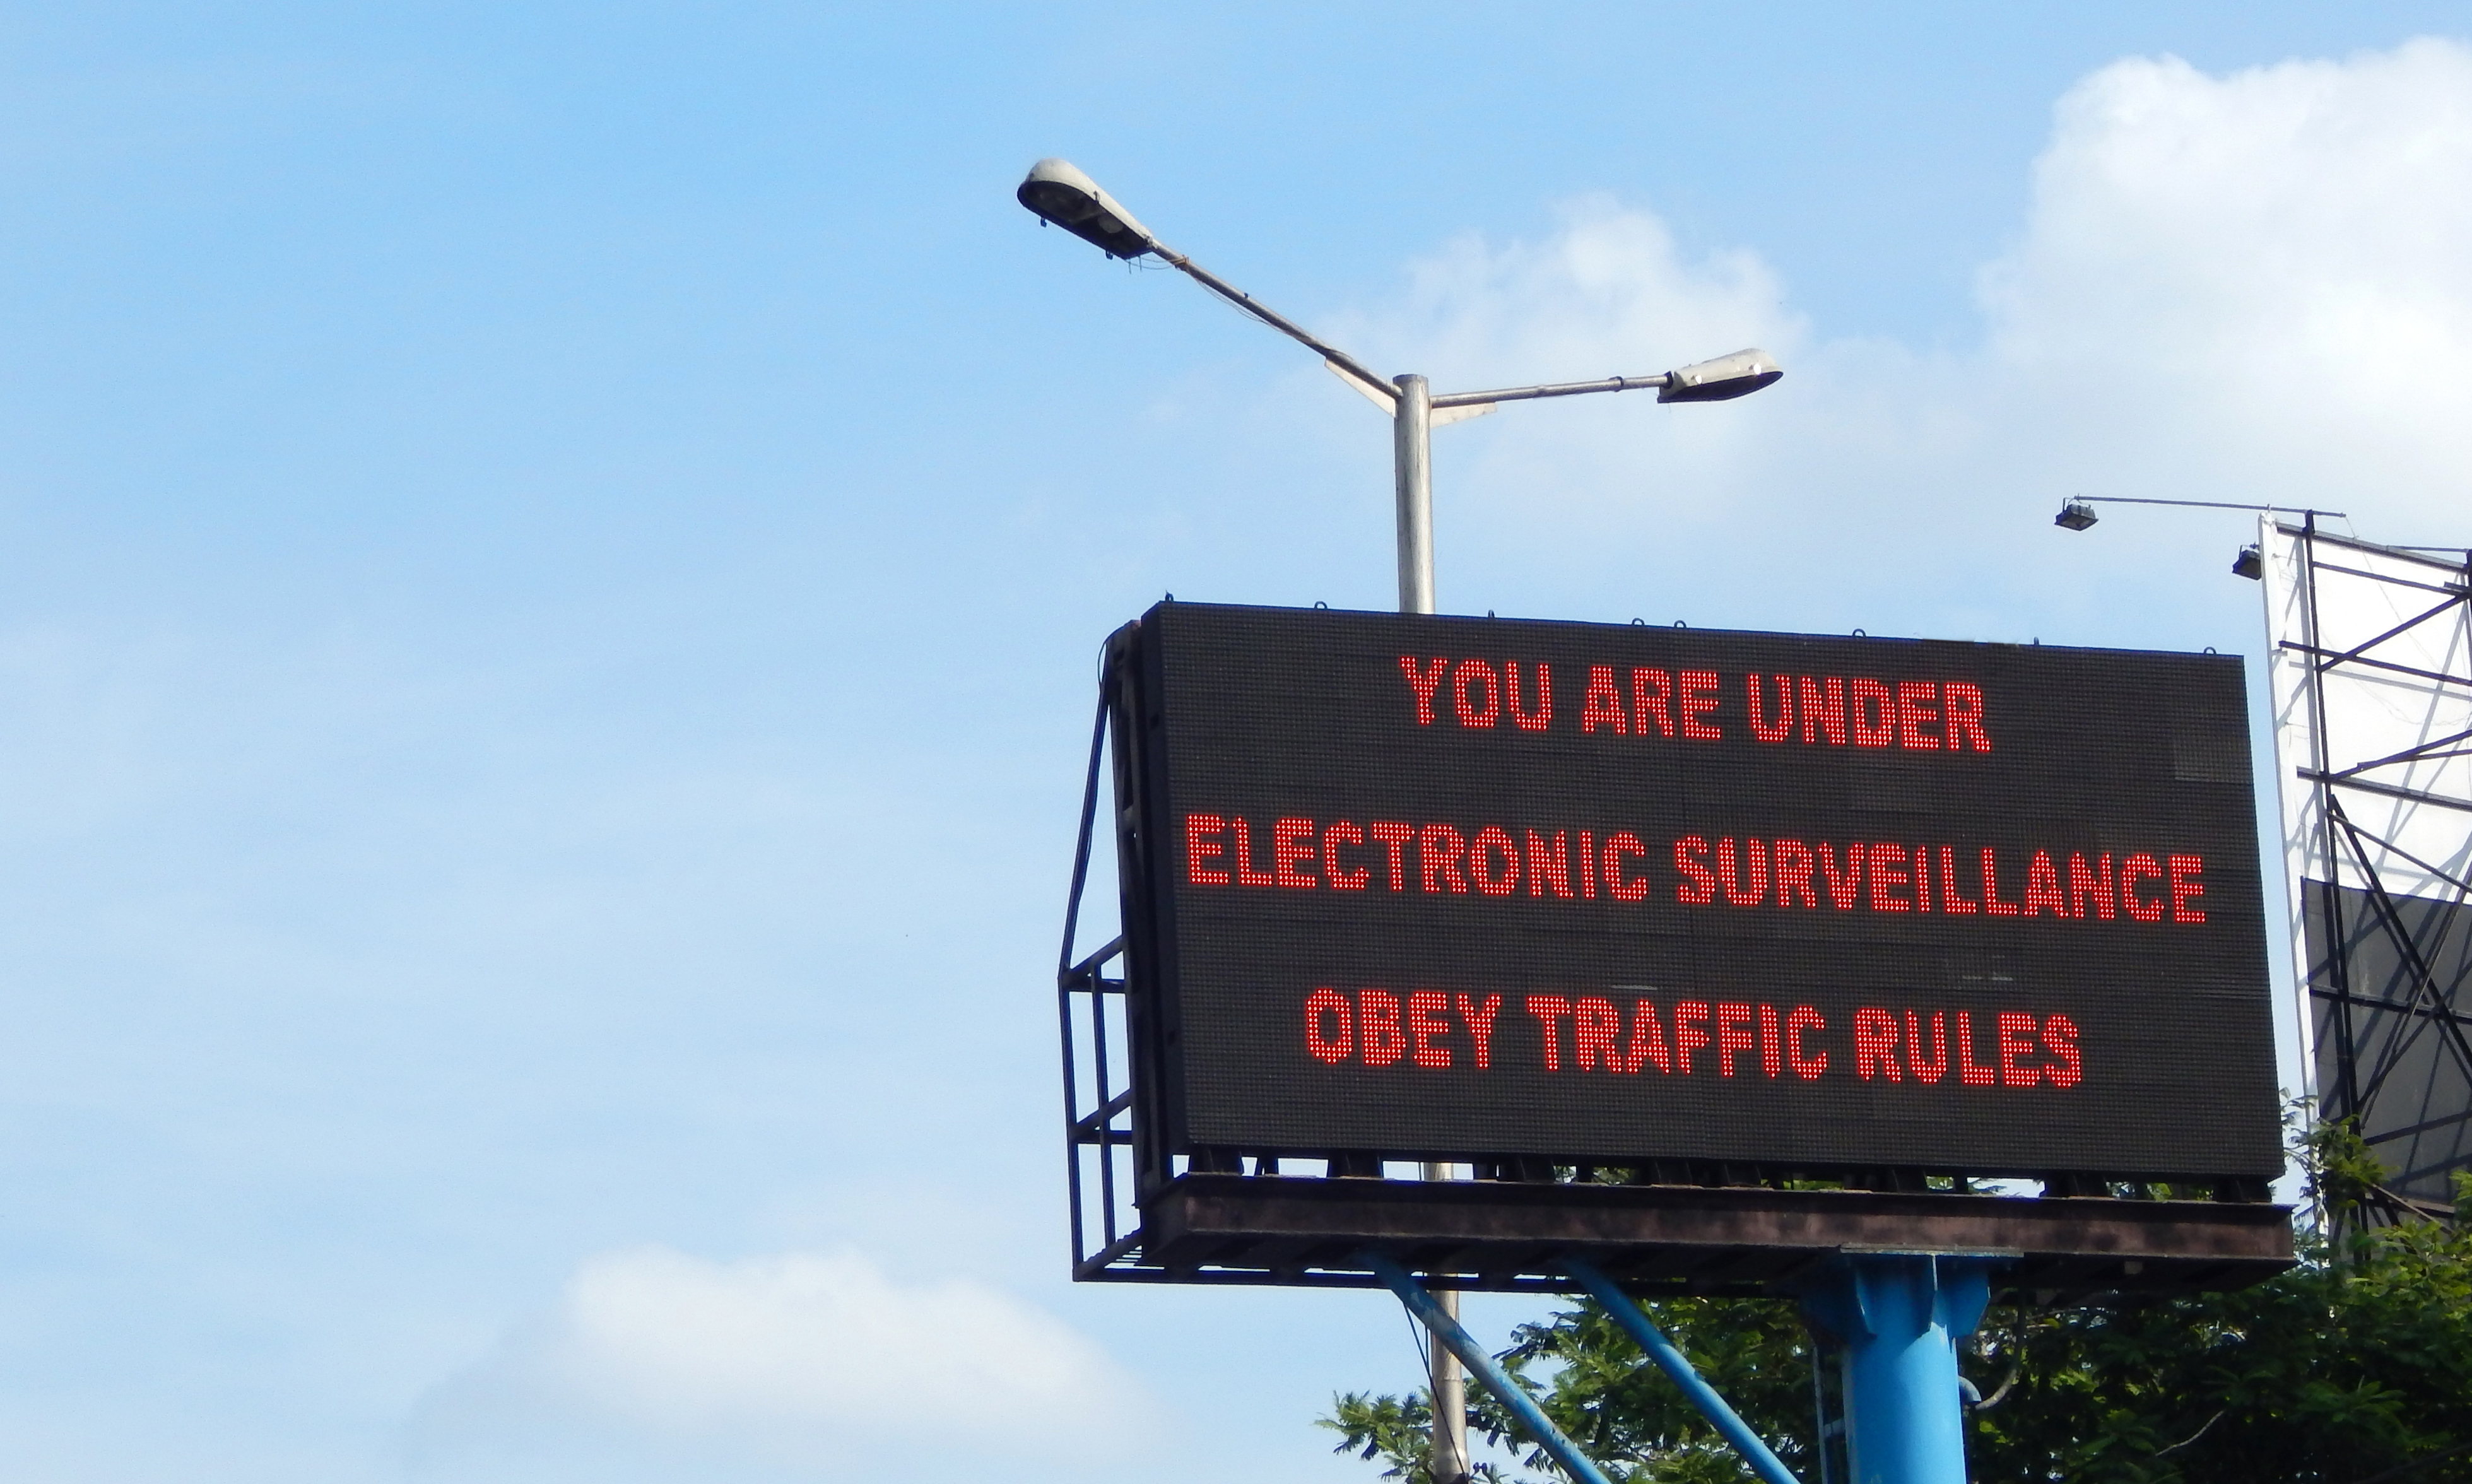 An LED display in Hyderabad warning vehicles of ongoing surveillance on the roads